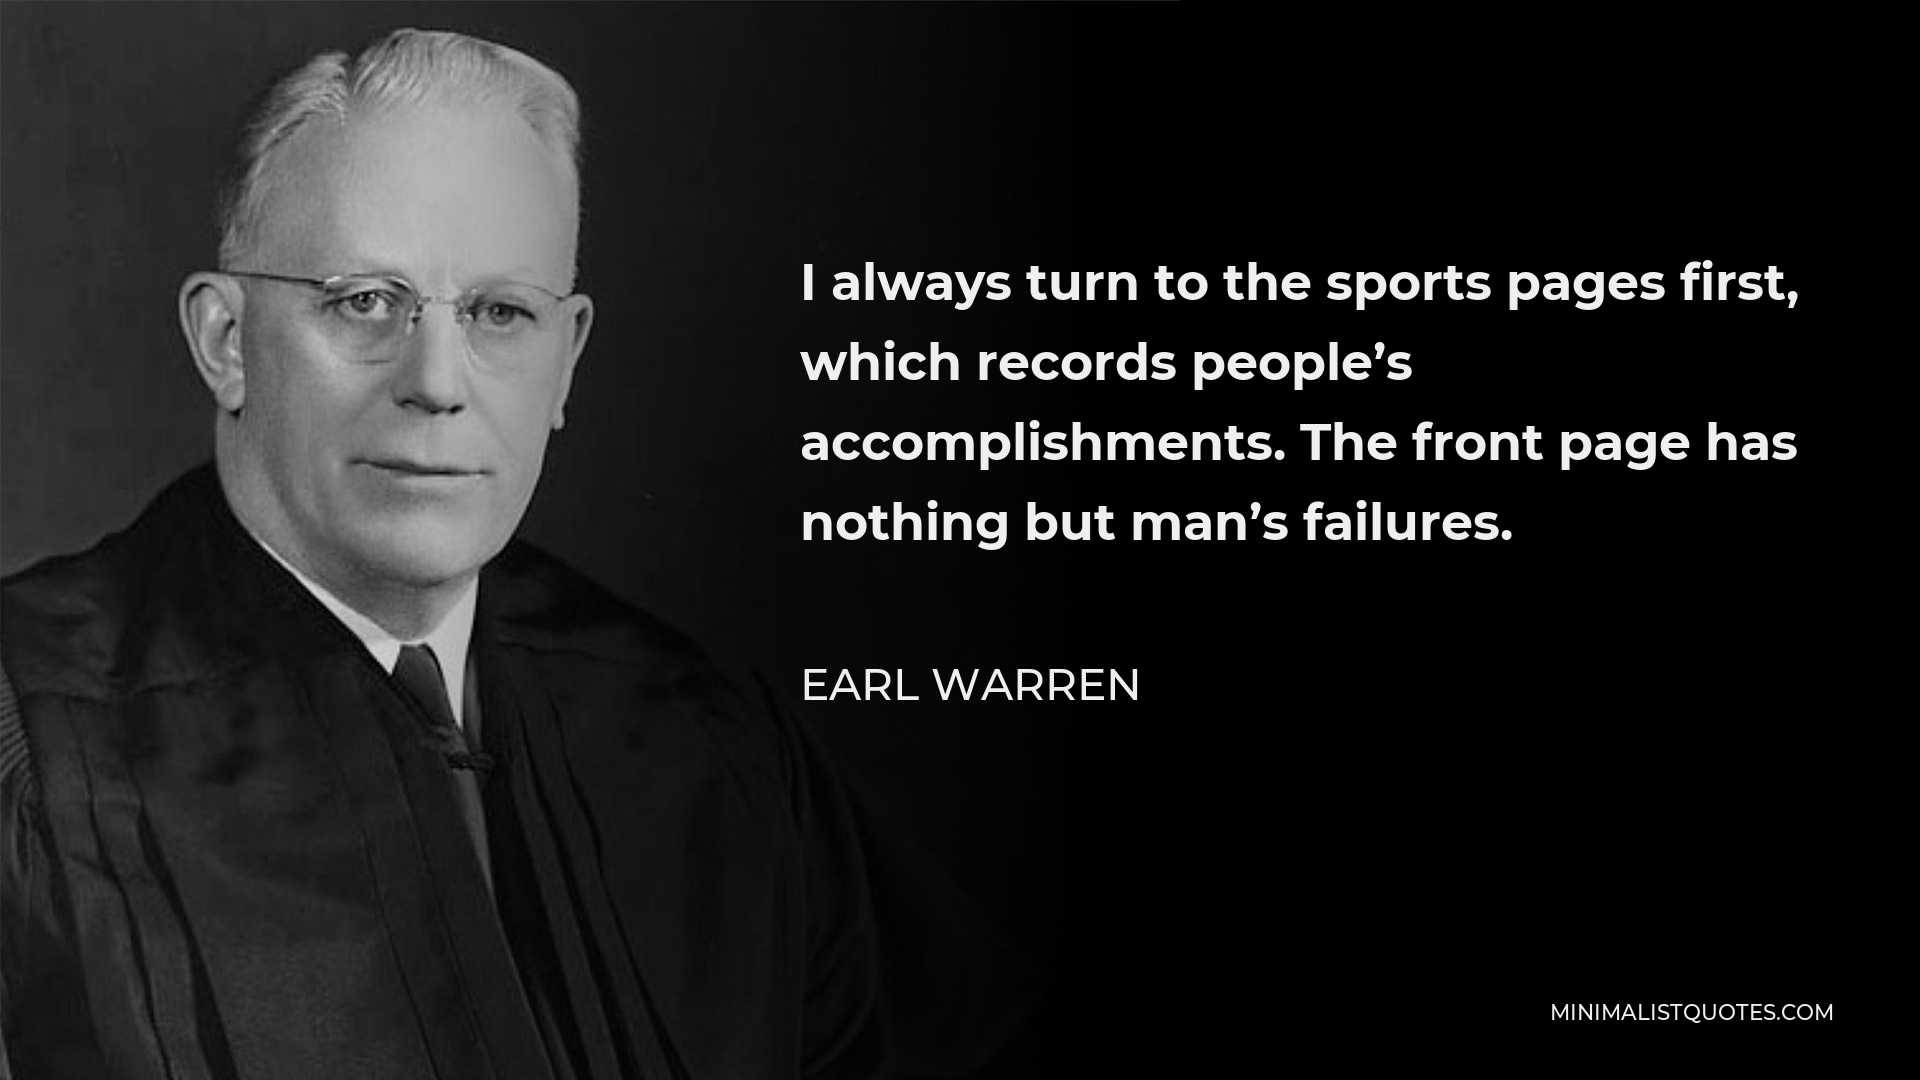 Earl Warren Quote - I always turn to the sports pages first, which records people’s accomplishments. The front page has nothing but man’s failures.